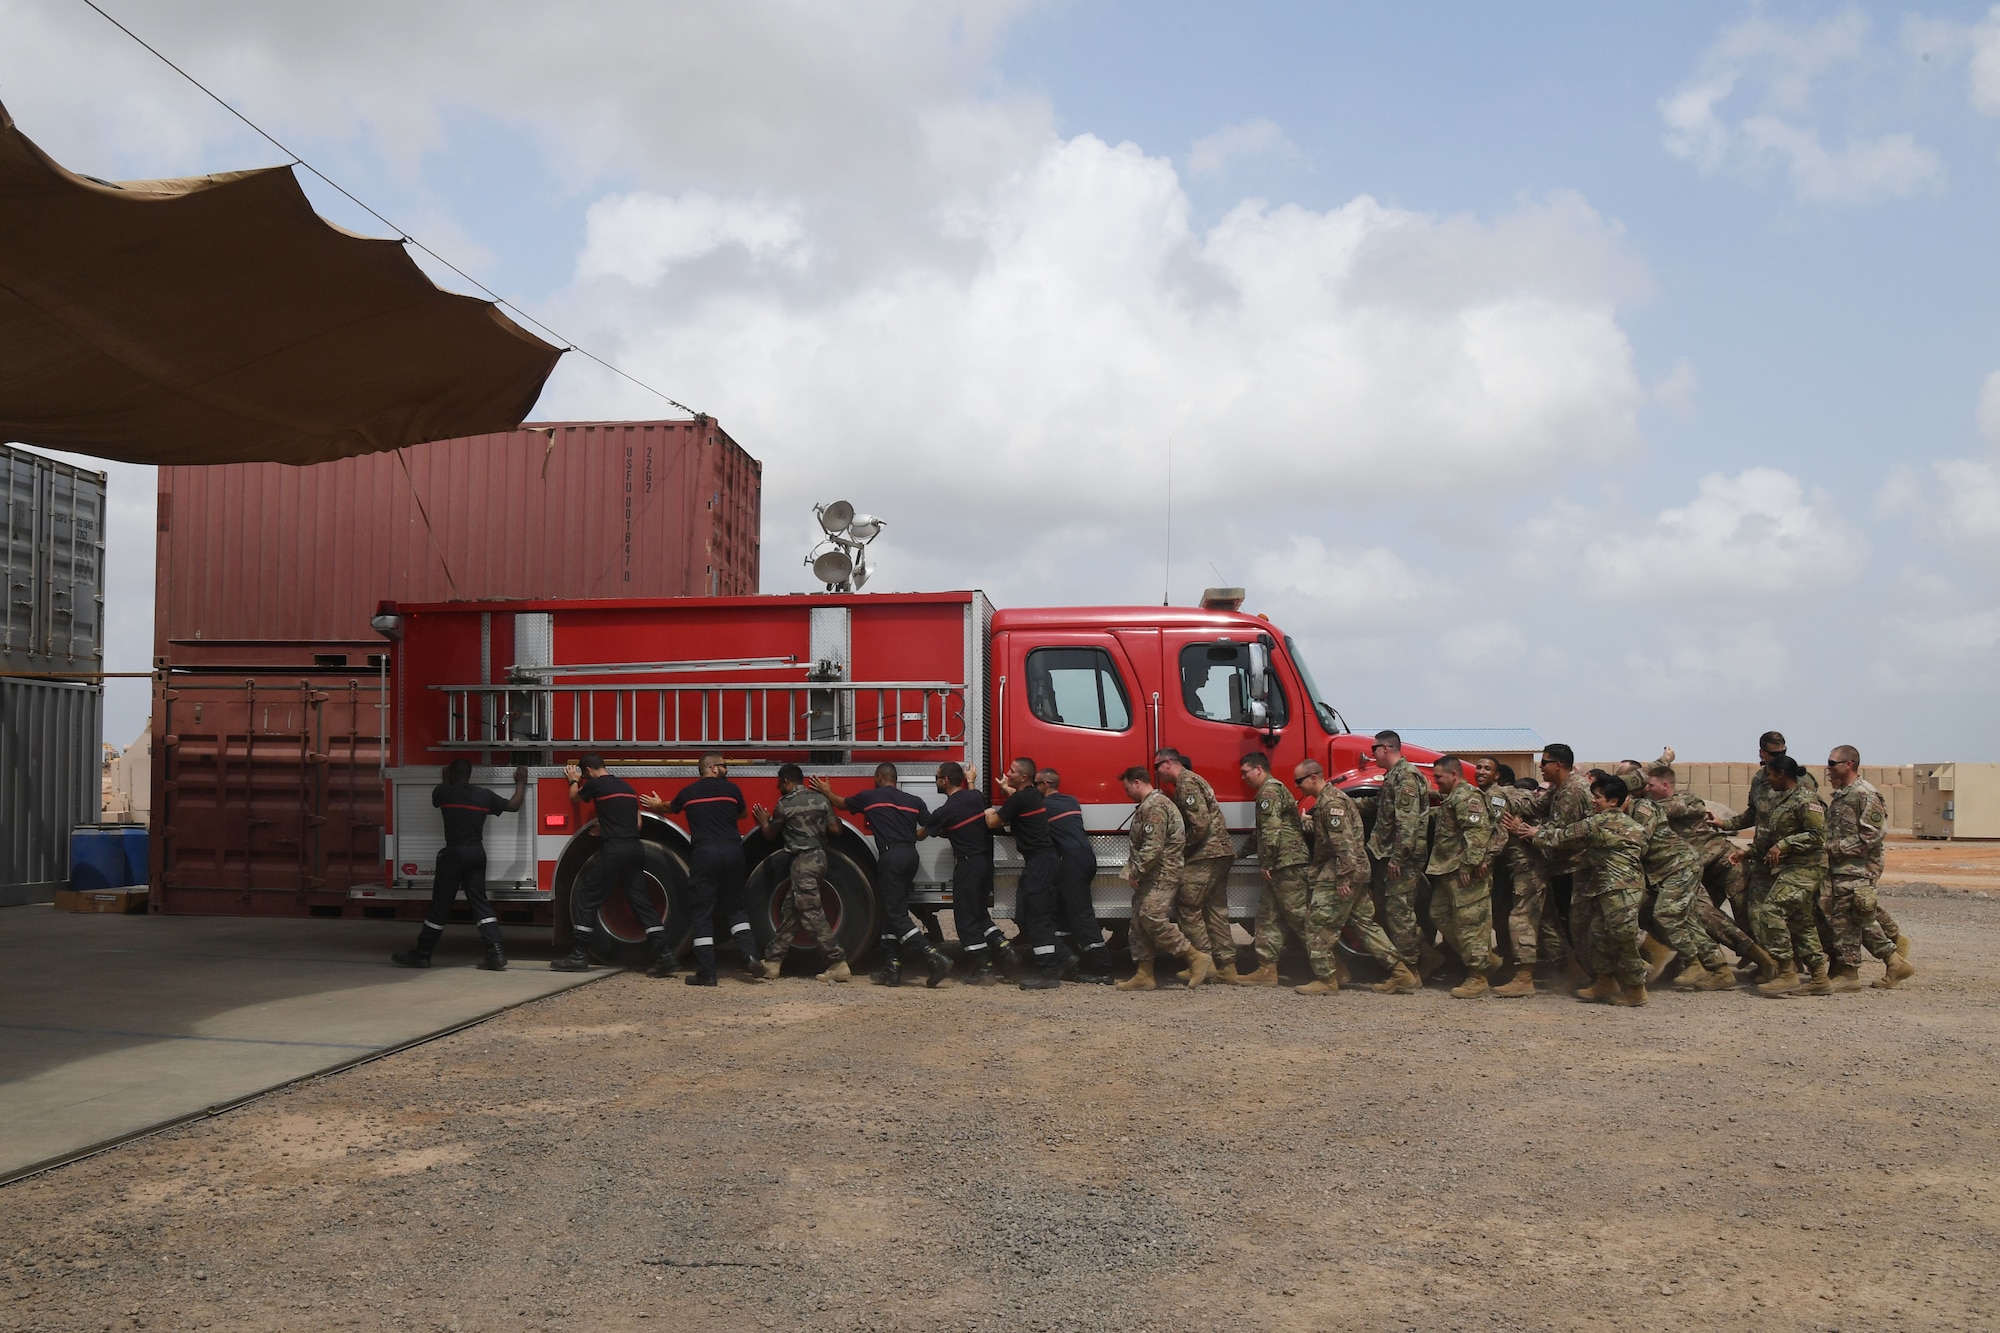 The 870th Air Expeditionary Squadron fire department and military community took part in a decades-old tradition and pushed a fire truck into its new home during a ceremony here Feb. 8.